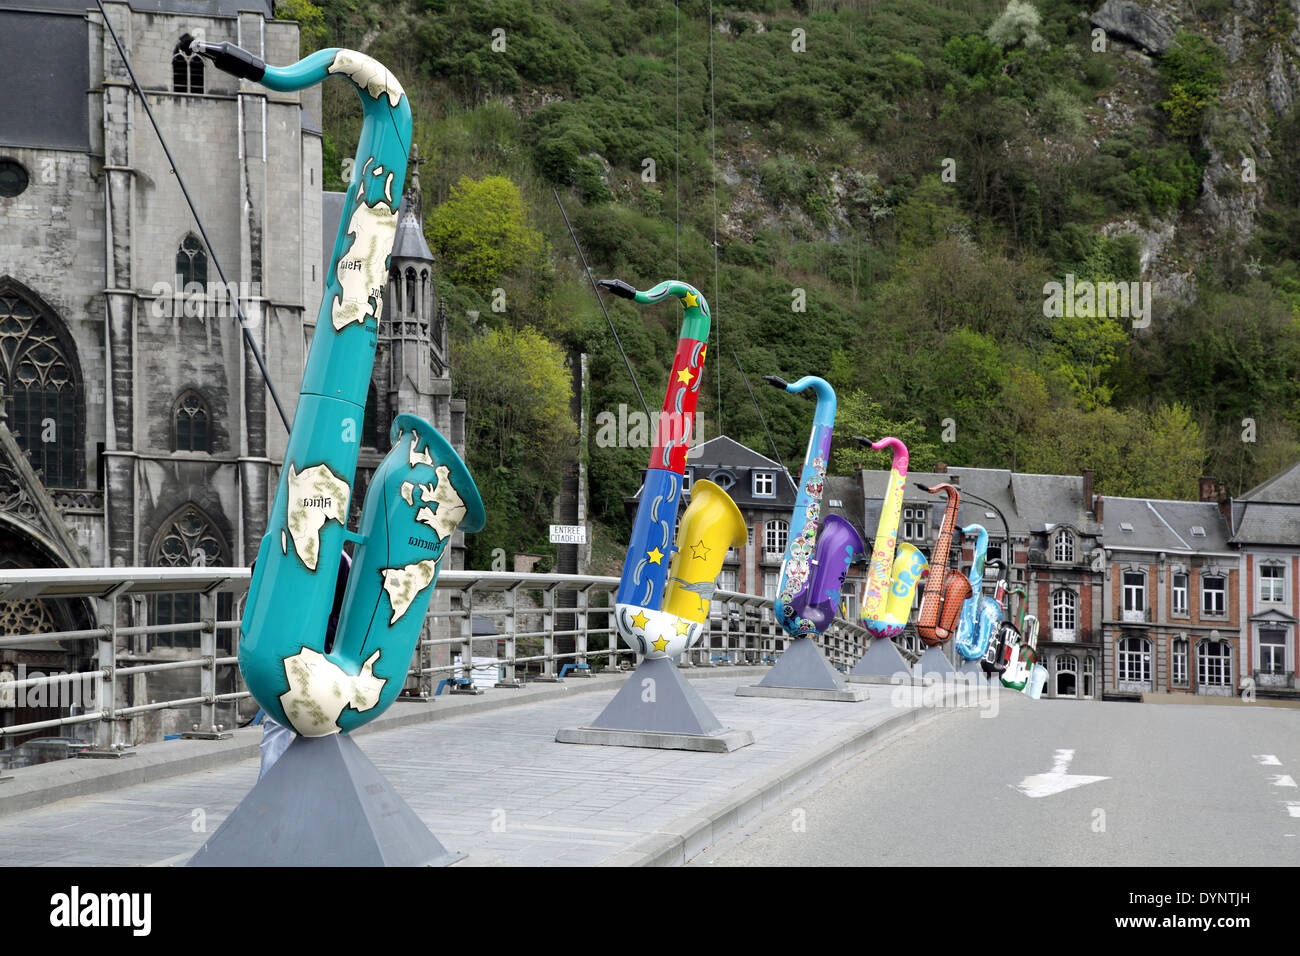 Dinant.City of the Saxophone inventor Adolphe Sax.He was a Citizen of Dinant.Belgium Stock Photo